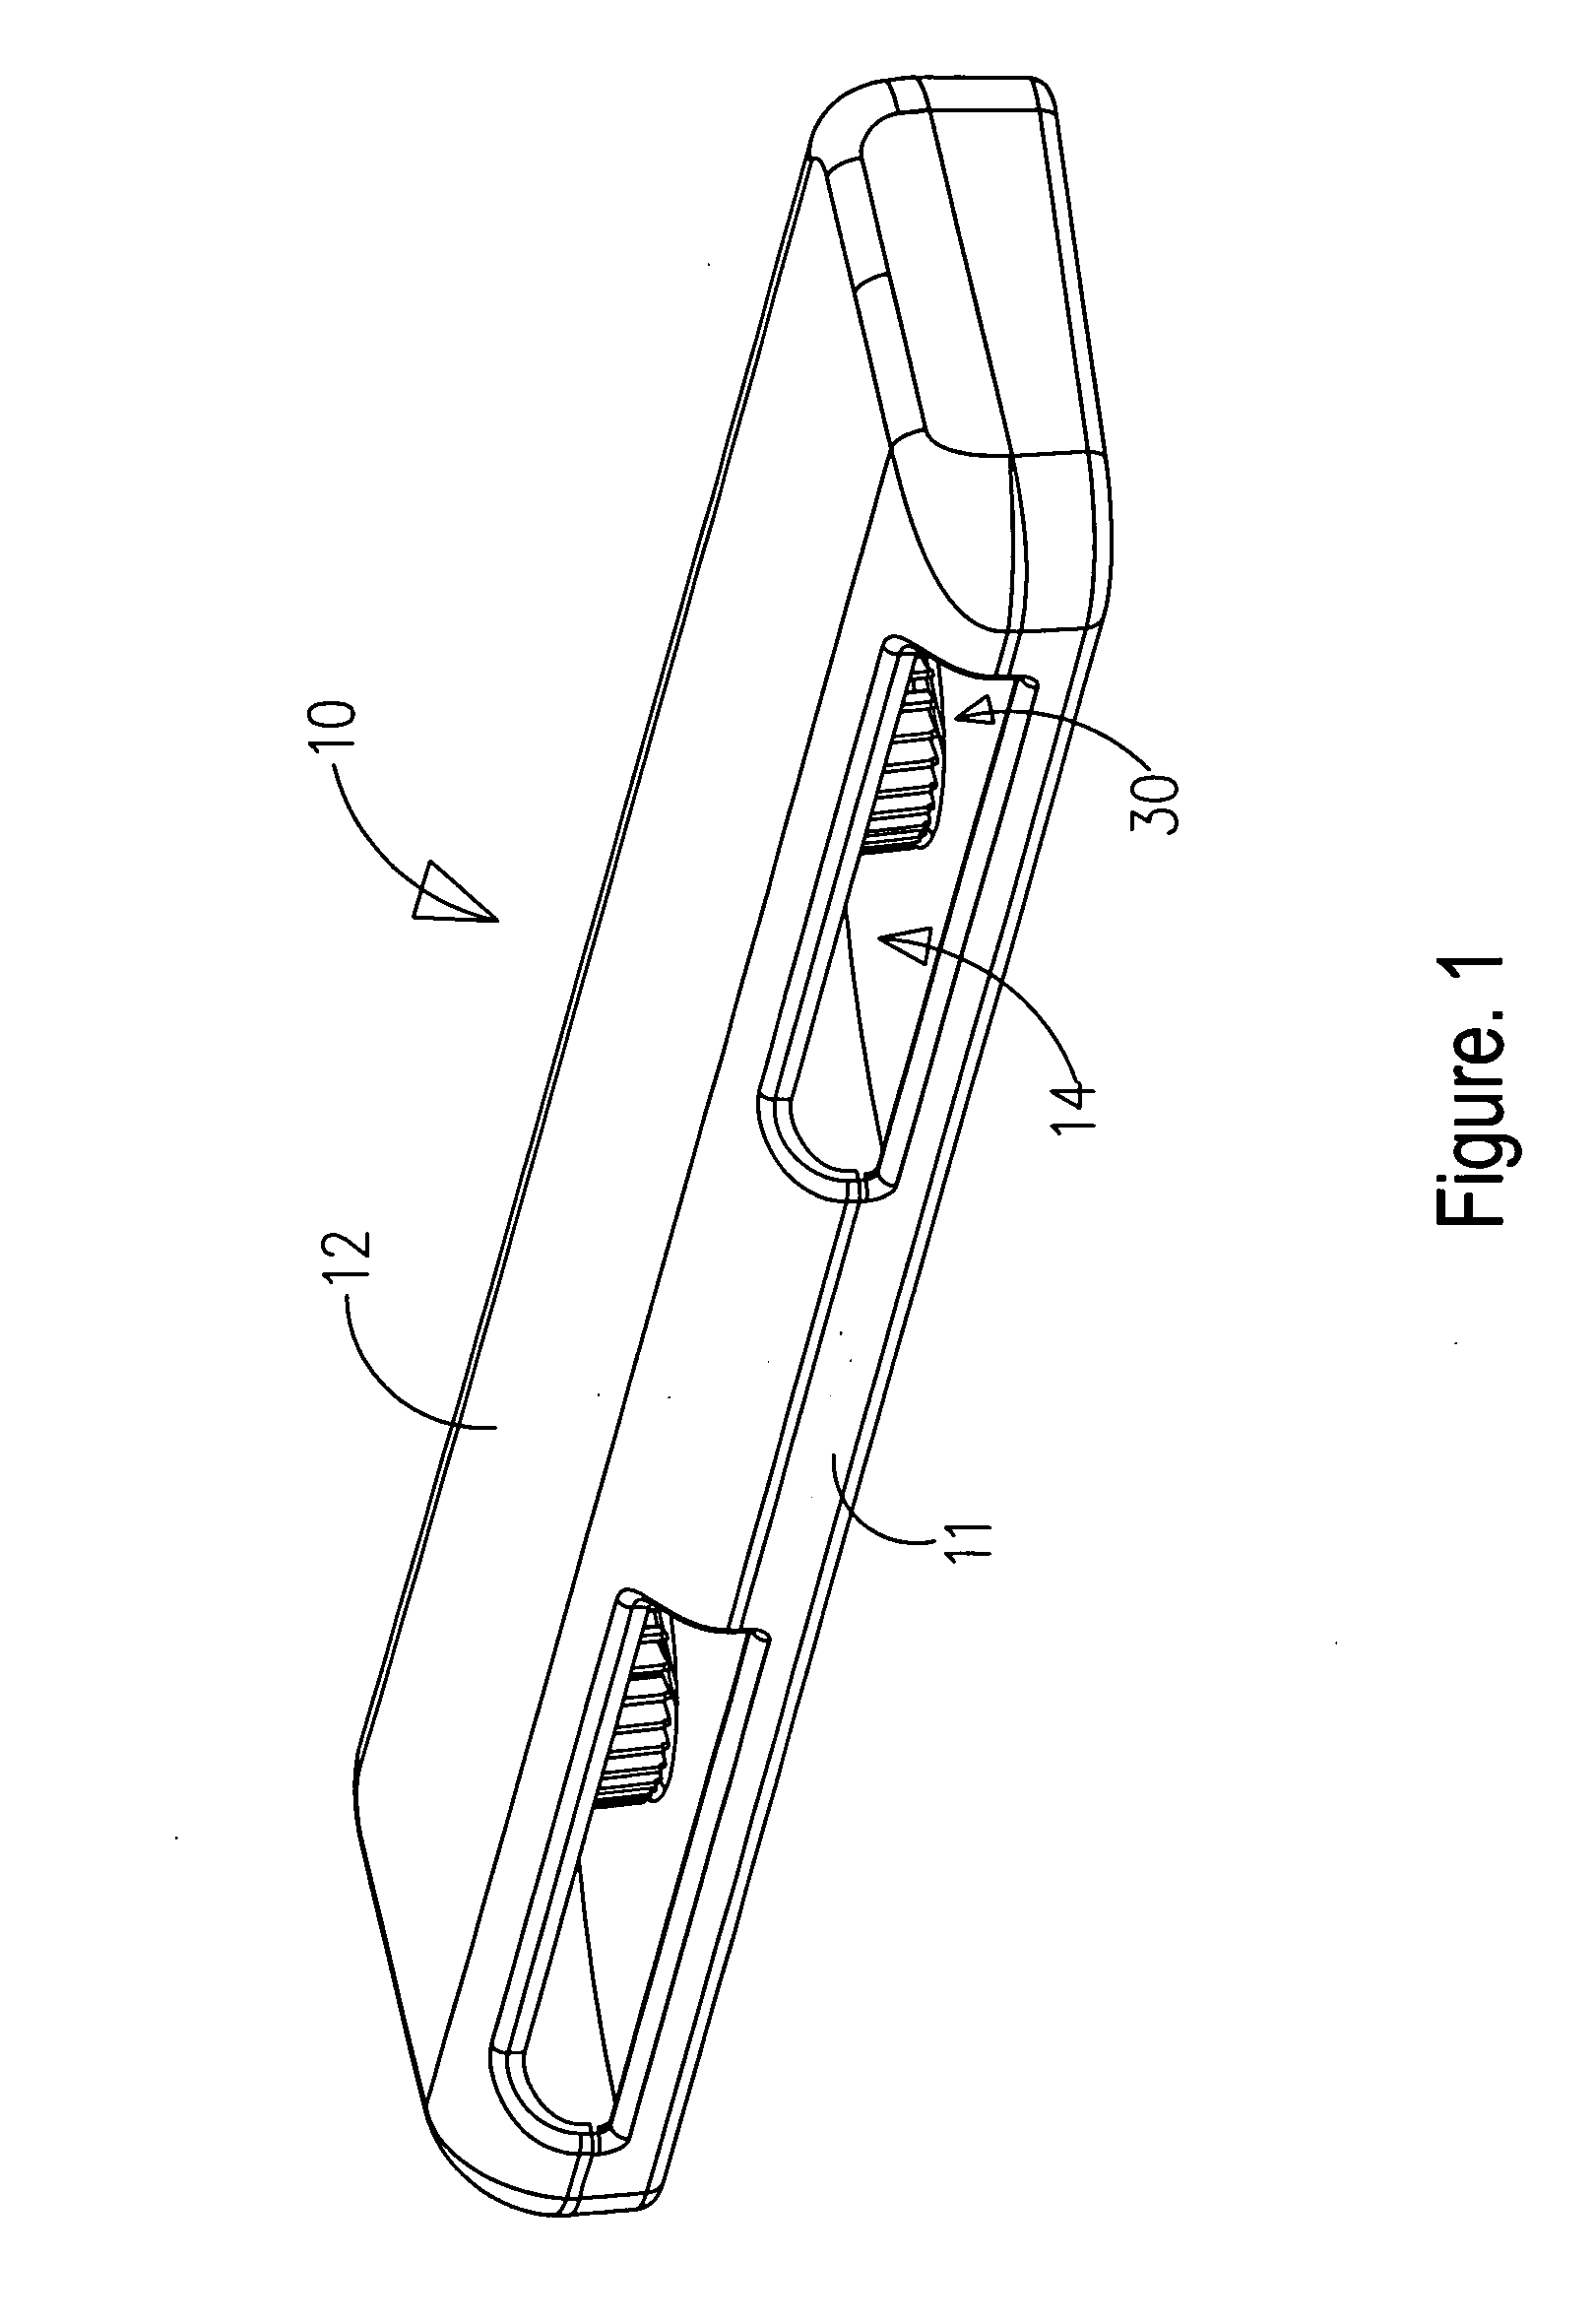 Heat dissipation device for portable computer